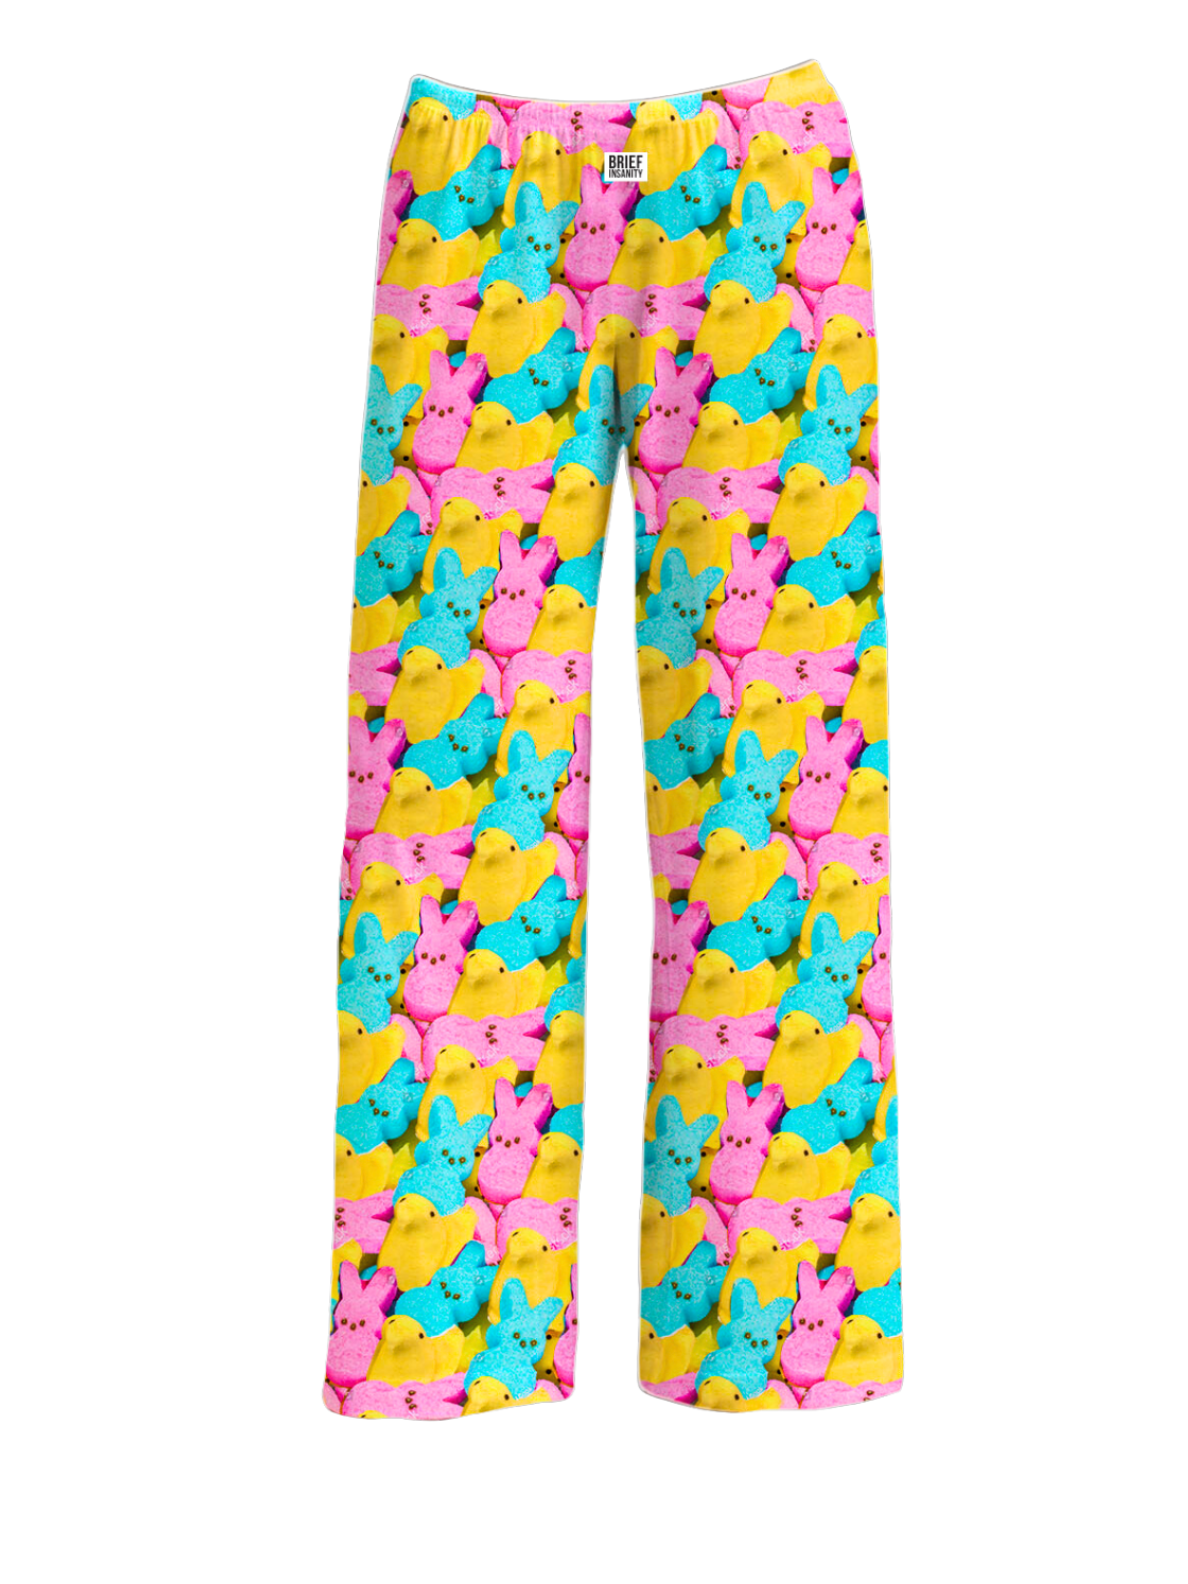 BRIEF INSANITY Sweet Marshmallow Lounge Pants